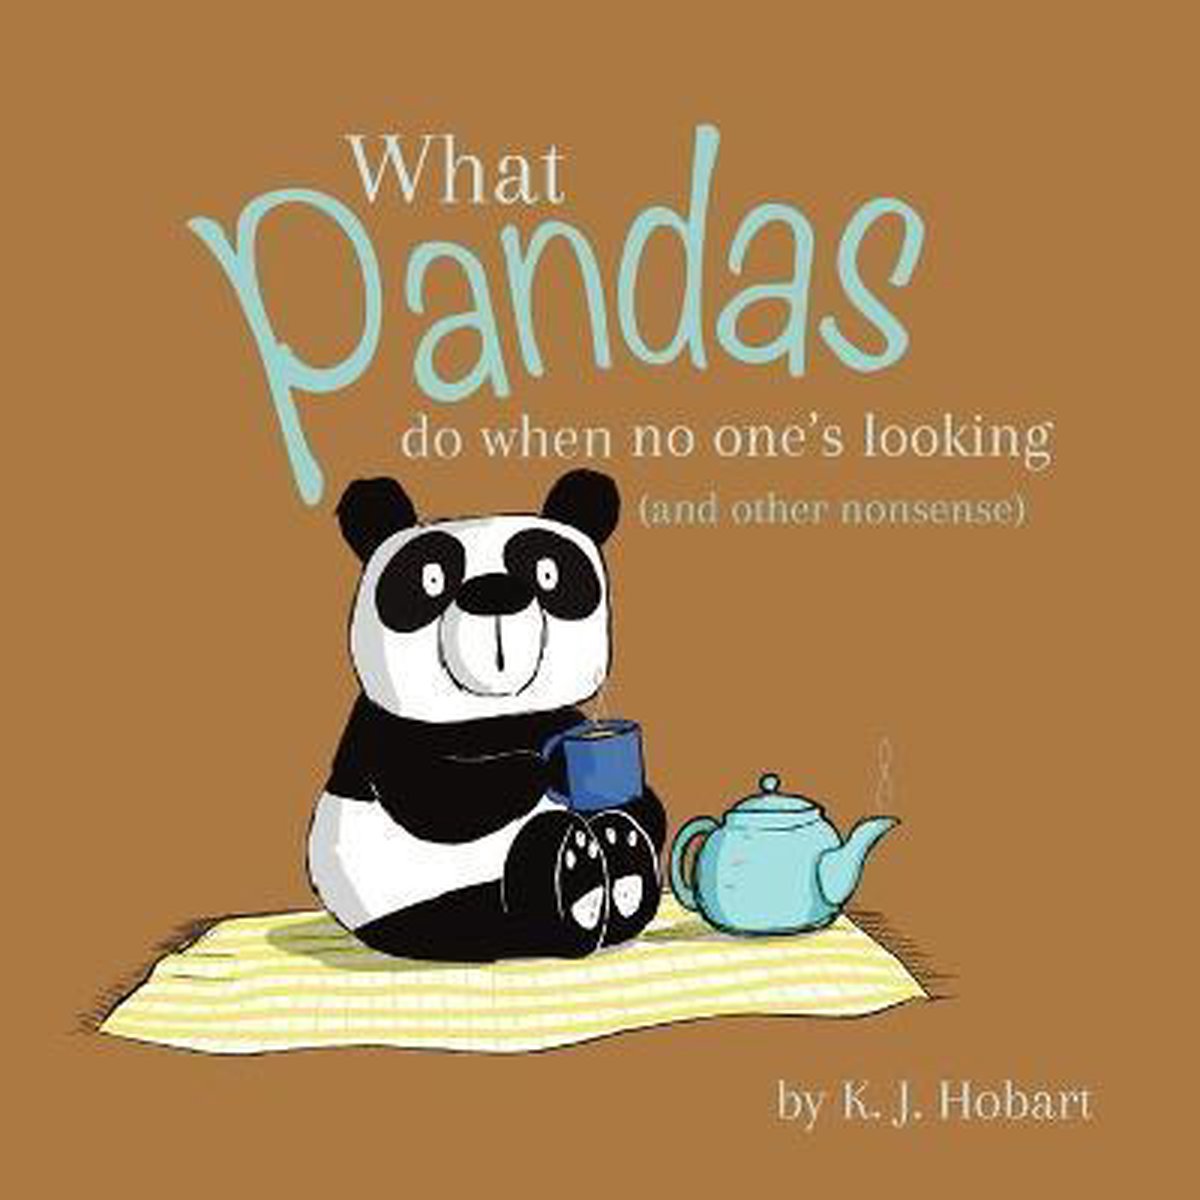 What Pandas Do When No One's Looking (and other nonsense)